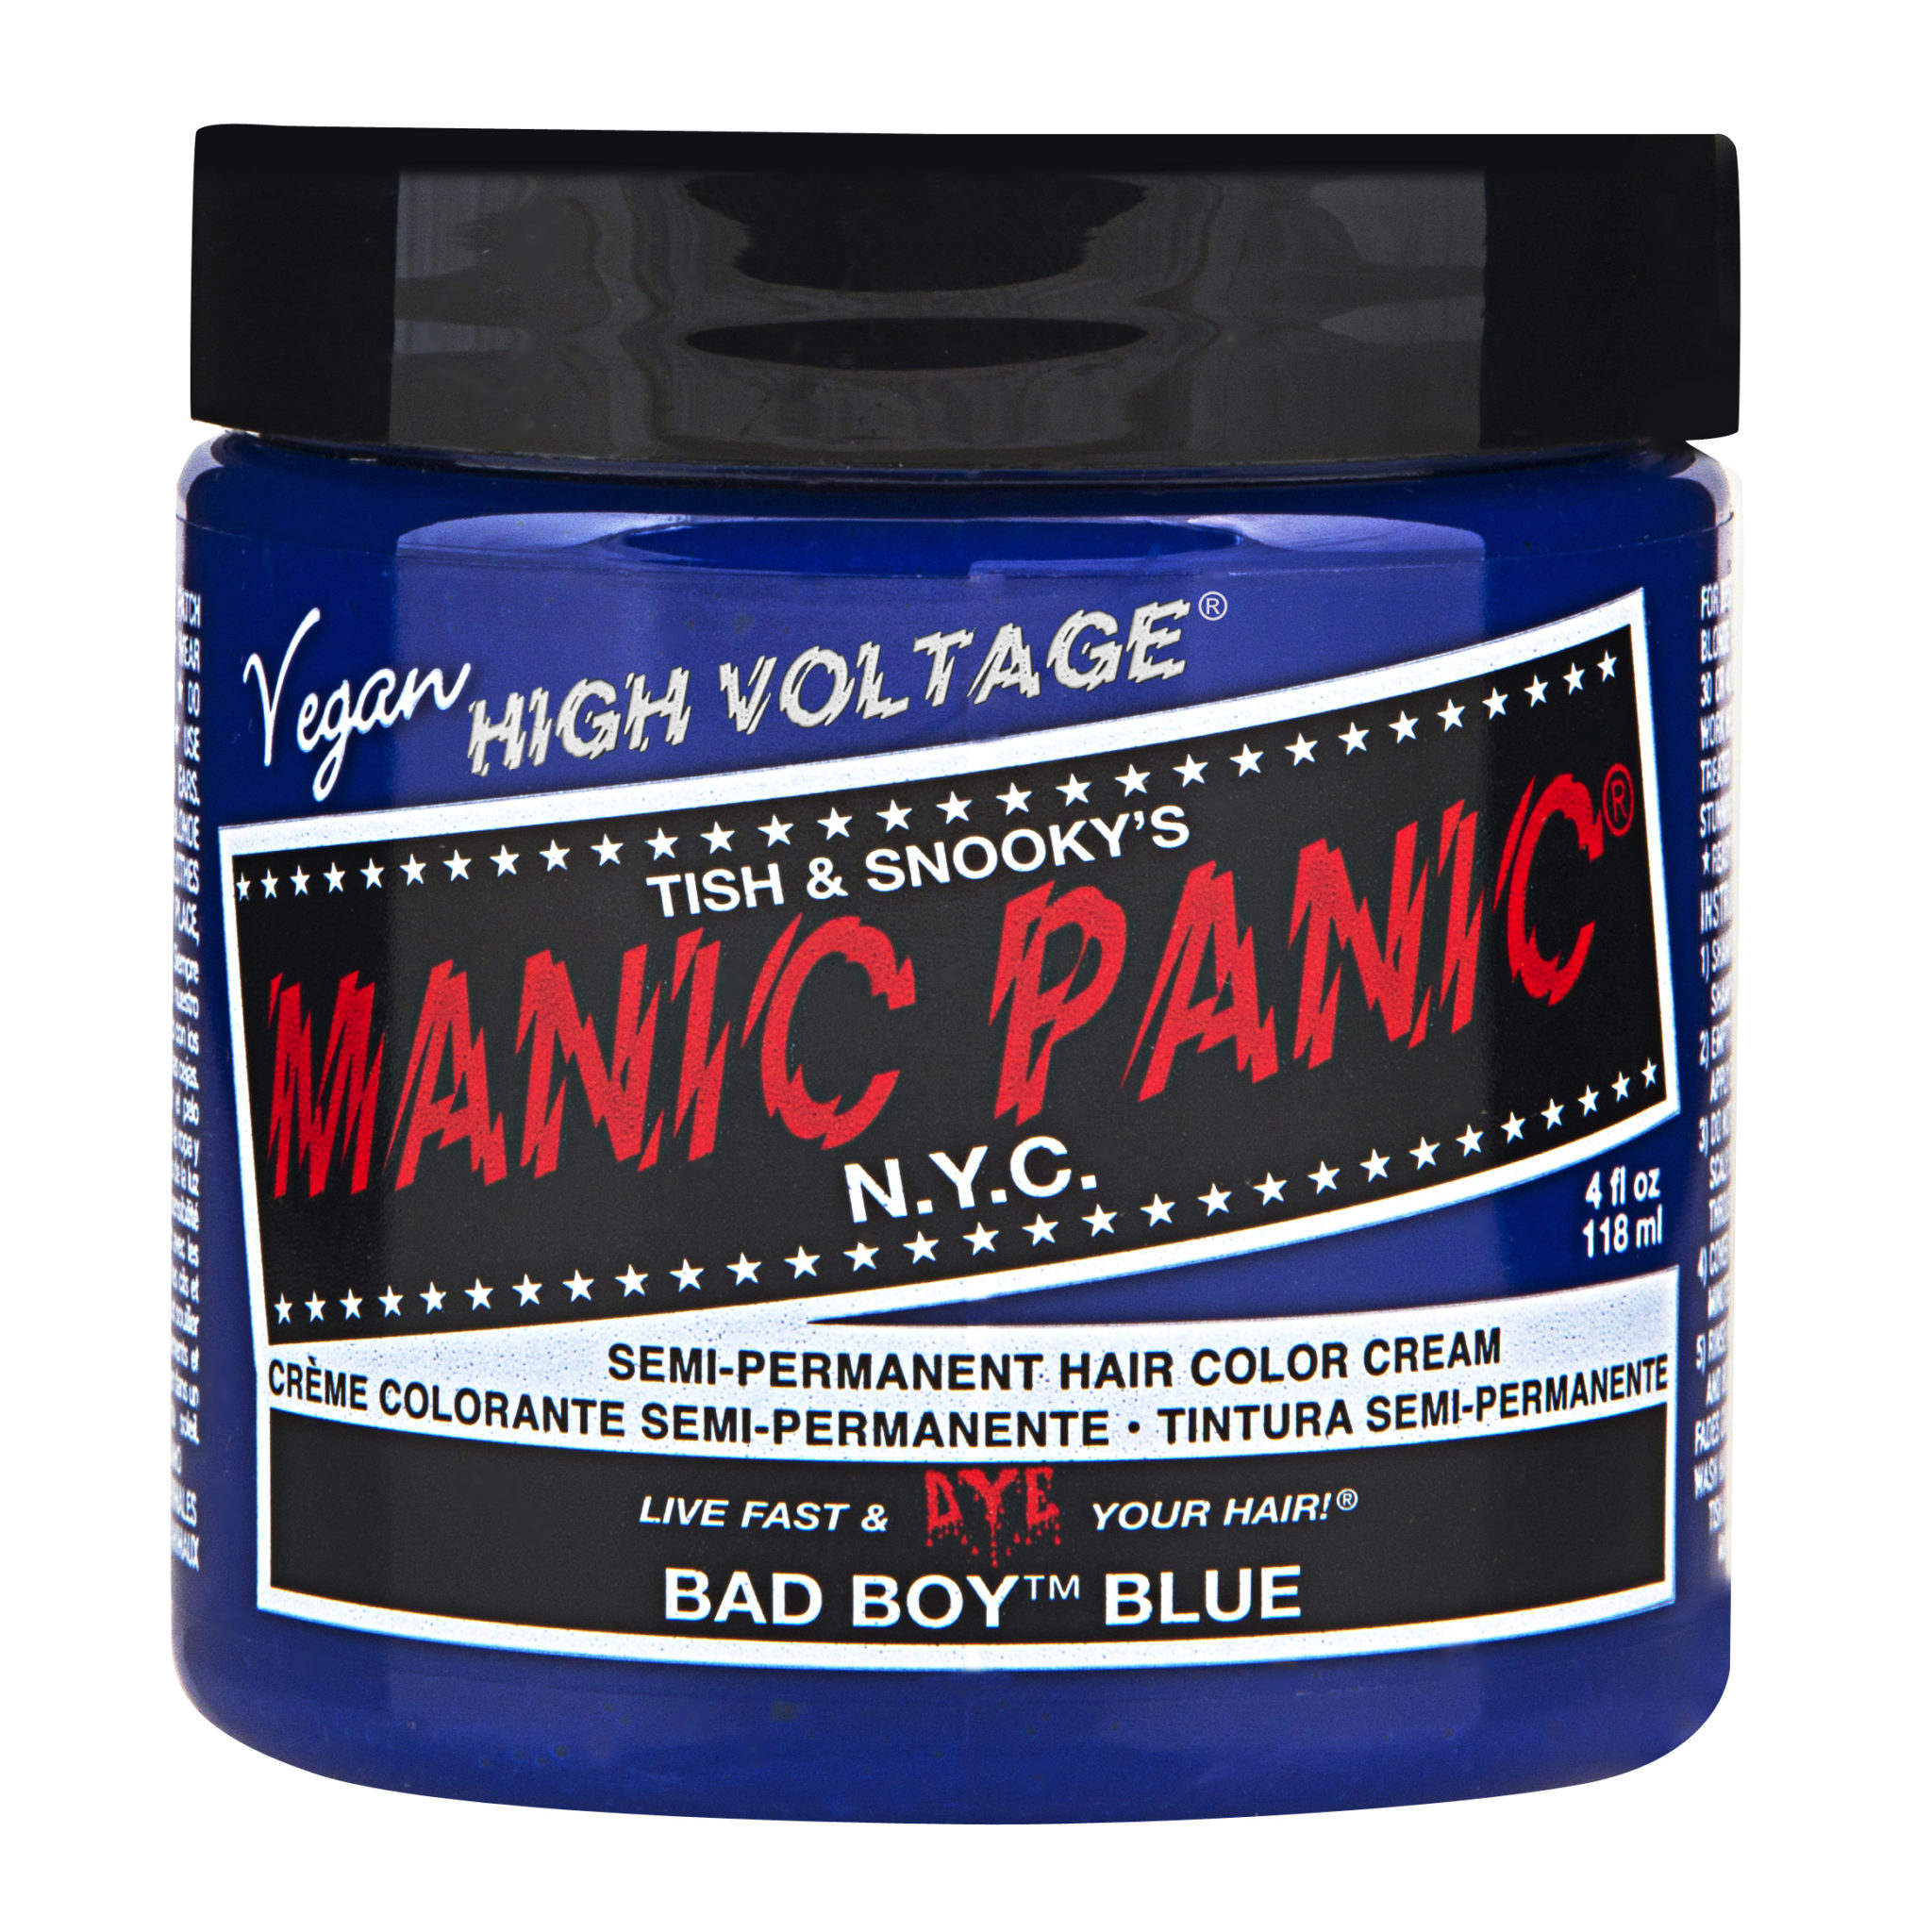 Manic Panic Bad Boy Blue Classic - Hair products Australia | Nation wide  hair care group